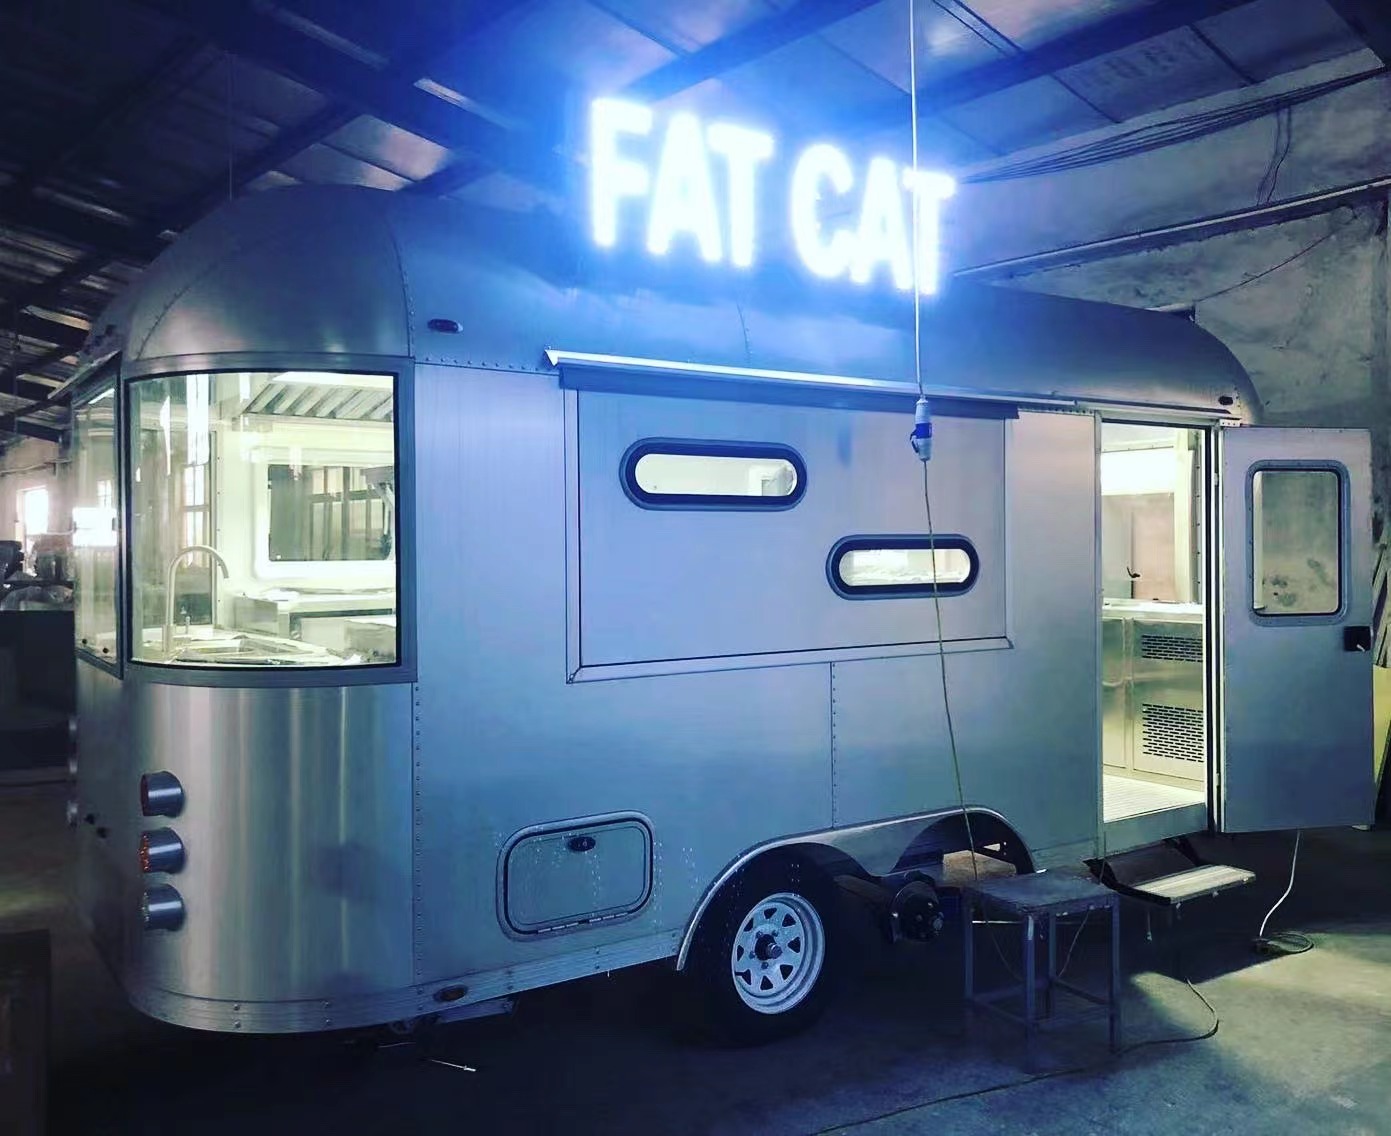 2022 Customized Airstream Food Trailer for Sale, Updated Mobile Food Vehicle